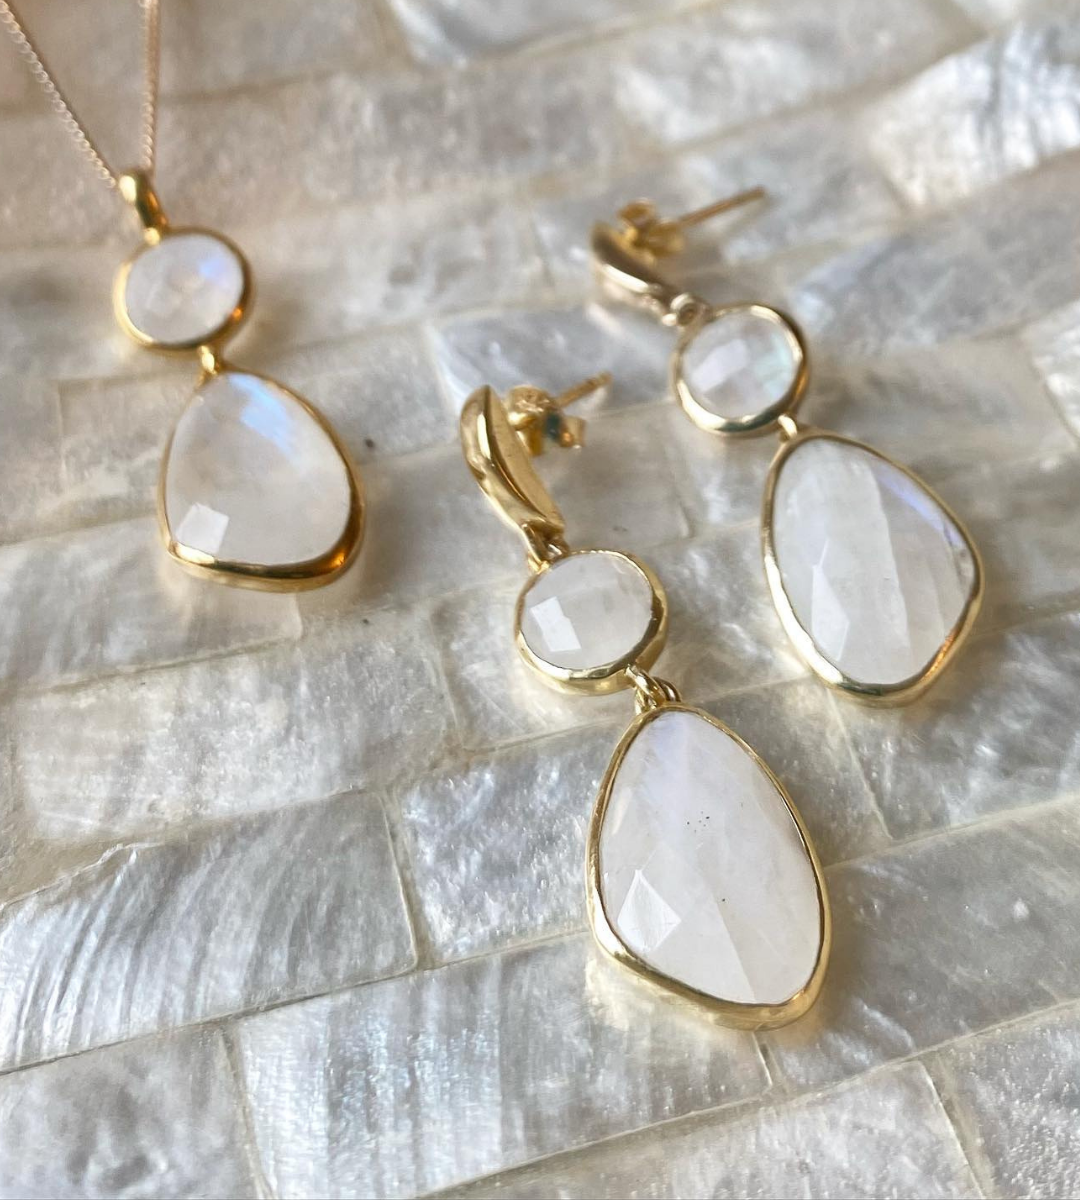 Photo of moonstone earrings and necklace by Sarah Alexander